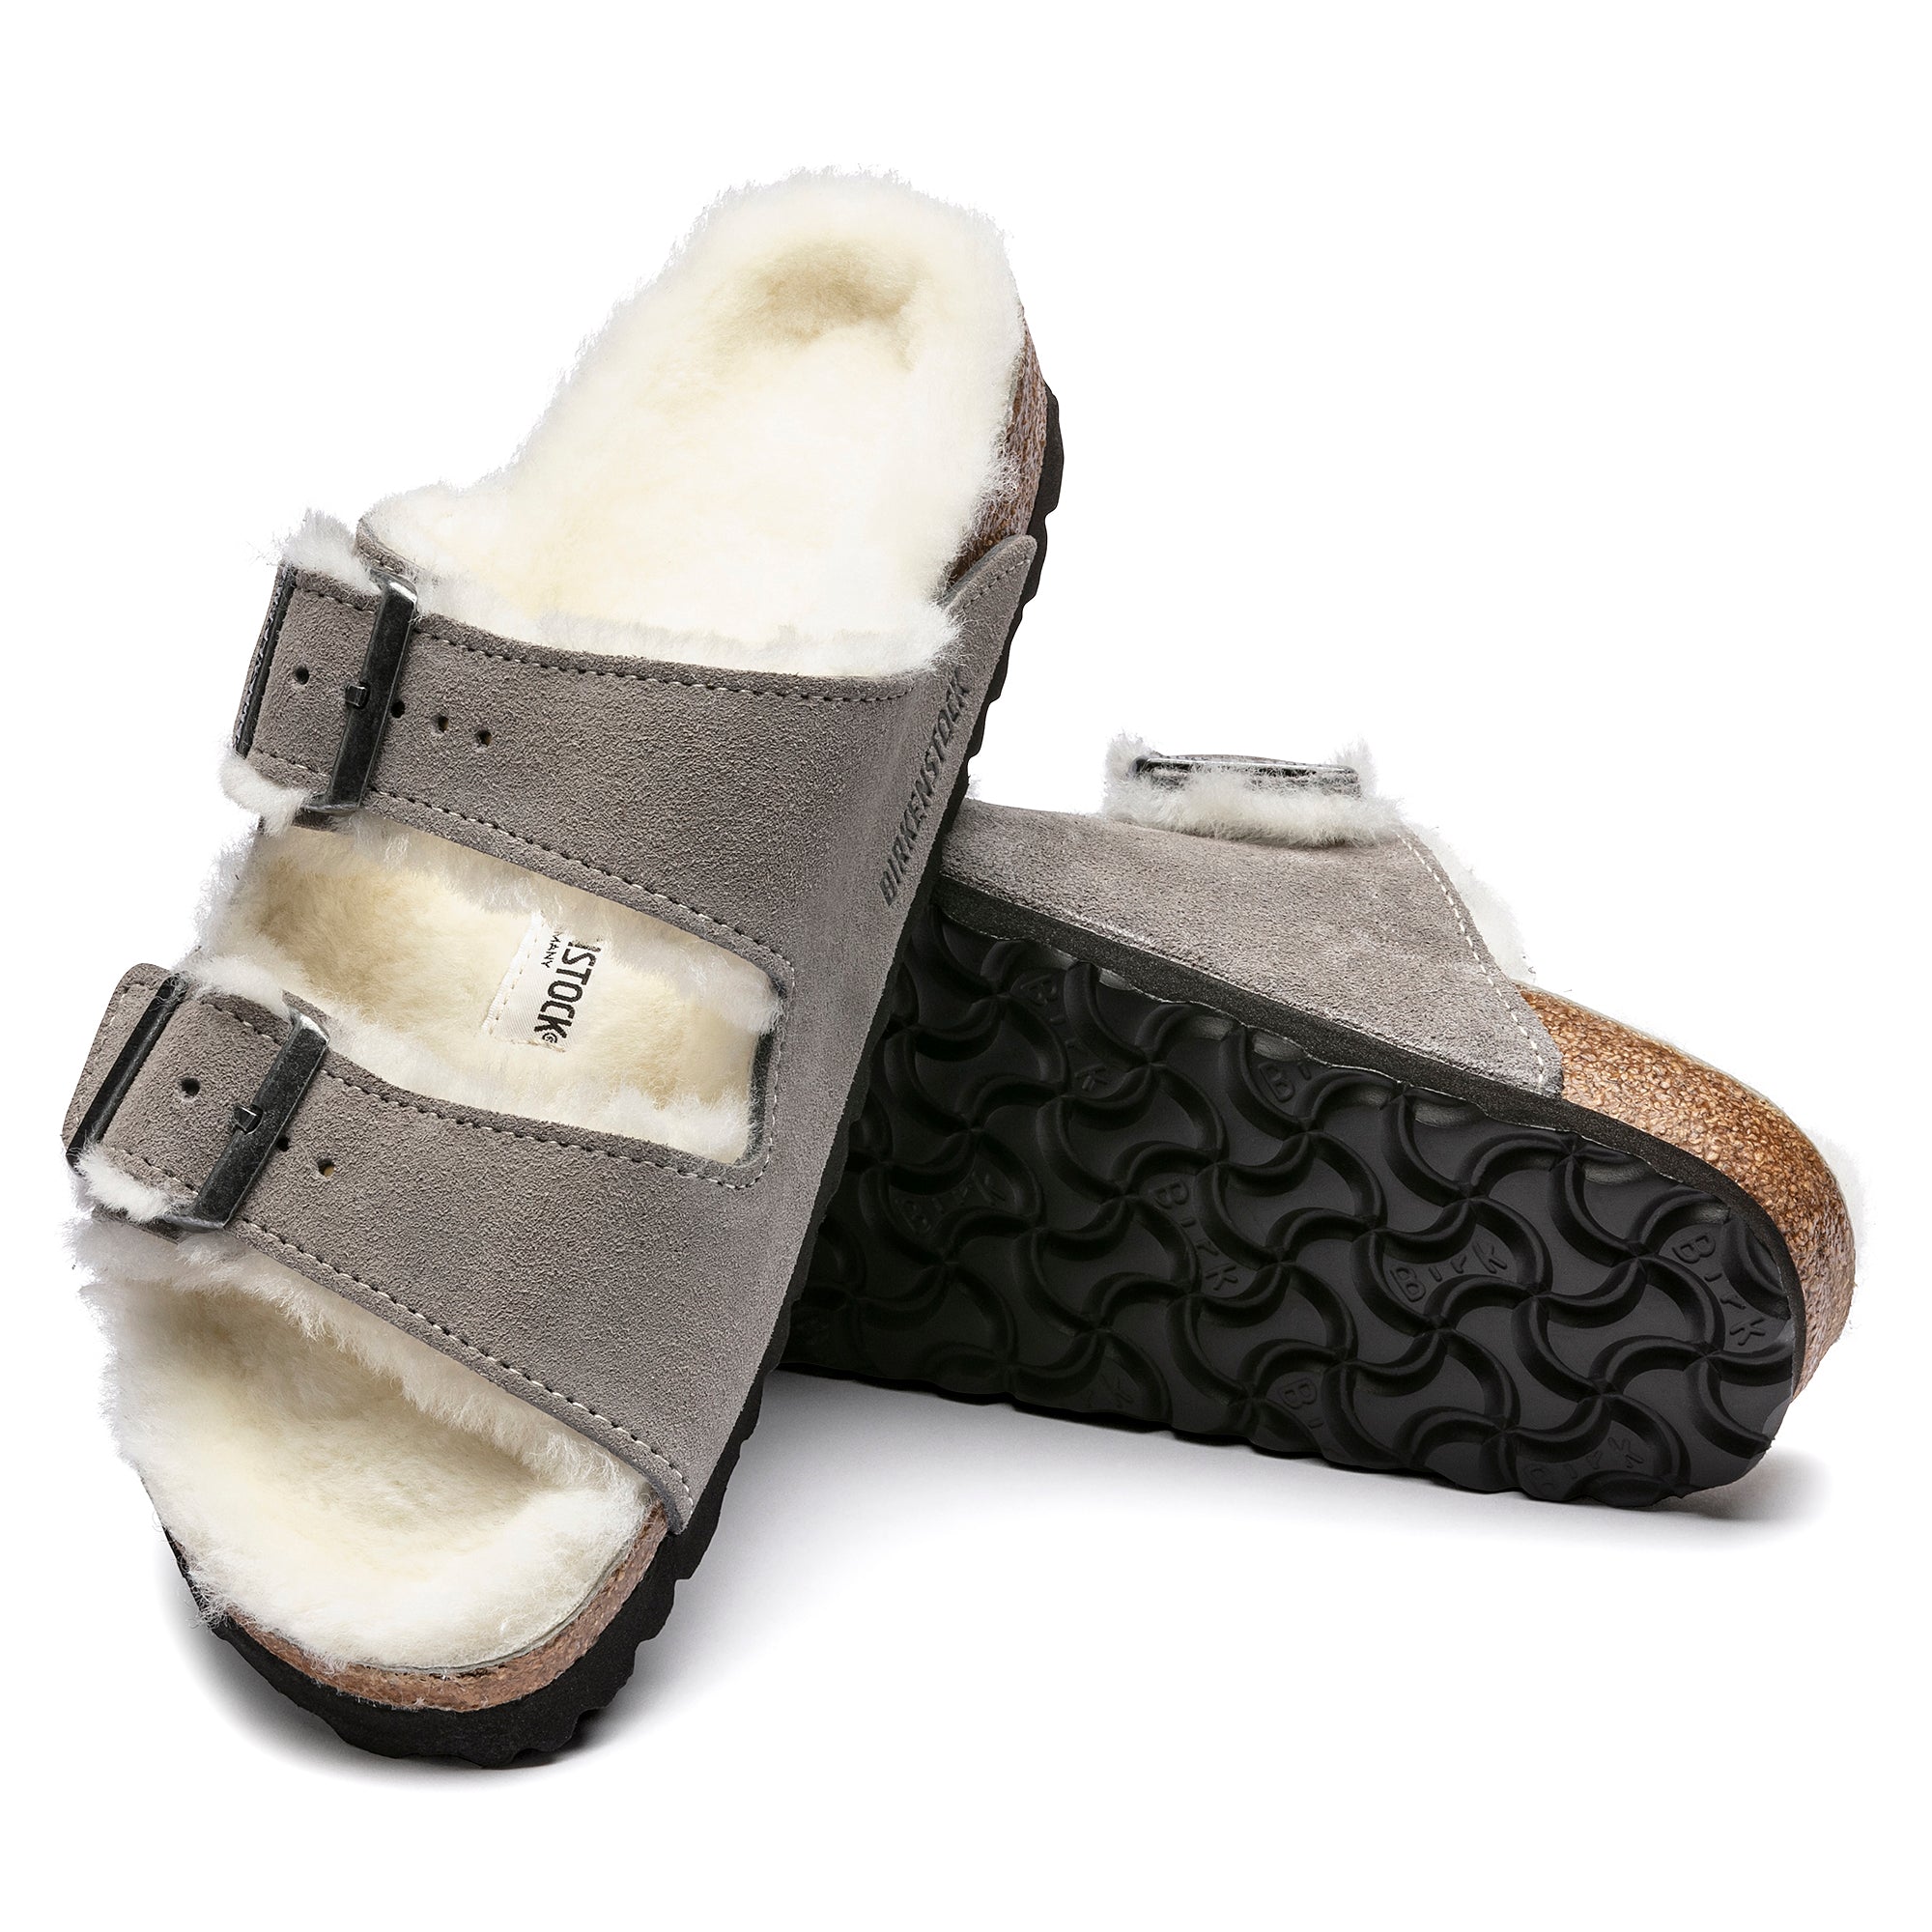 Birkenstock Limited Edition Arizona stone coin suede/natural shearling